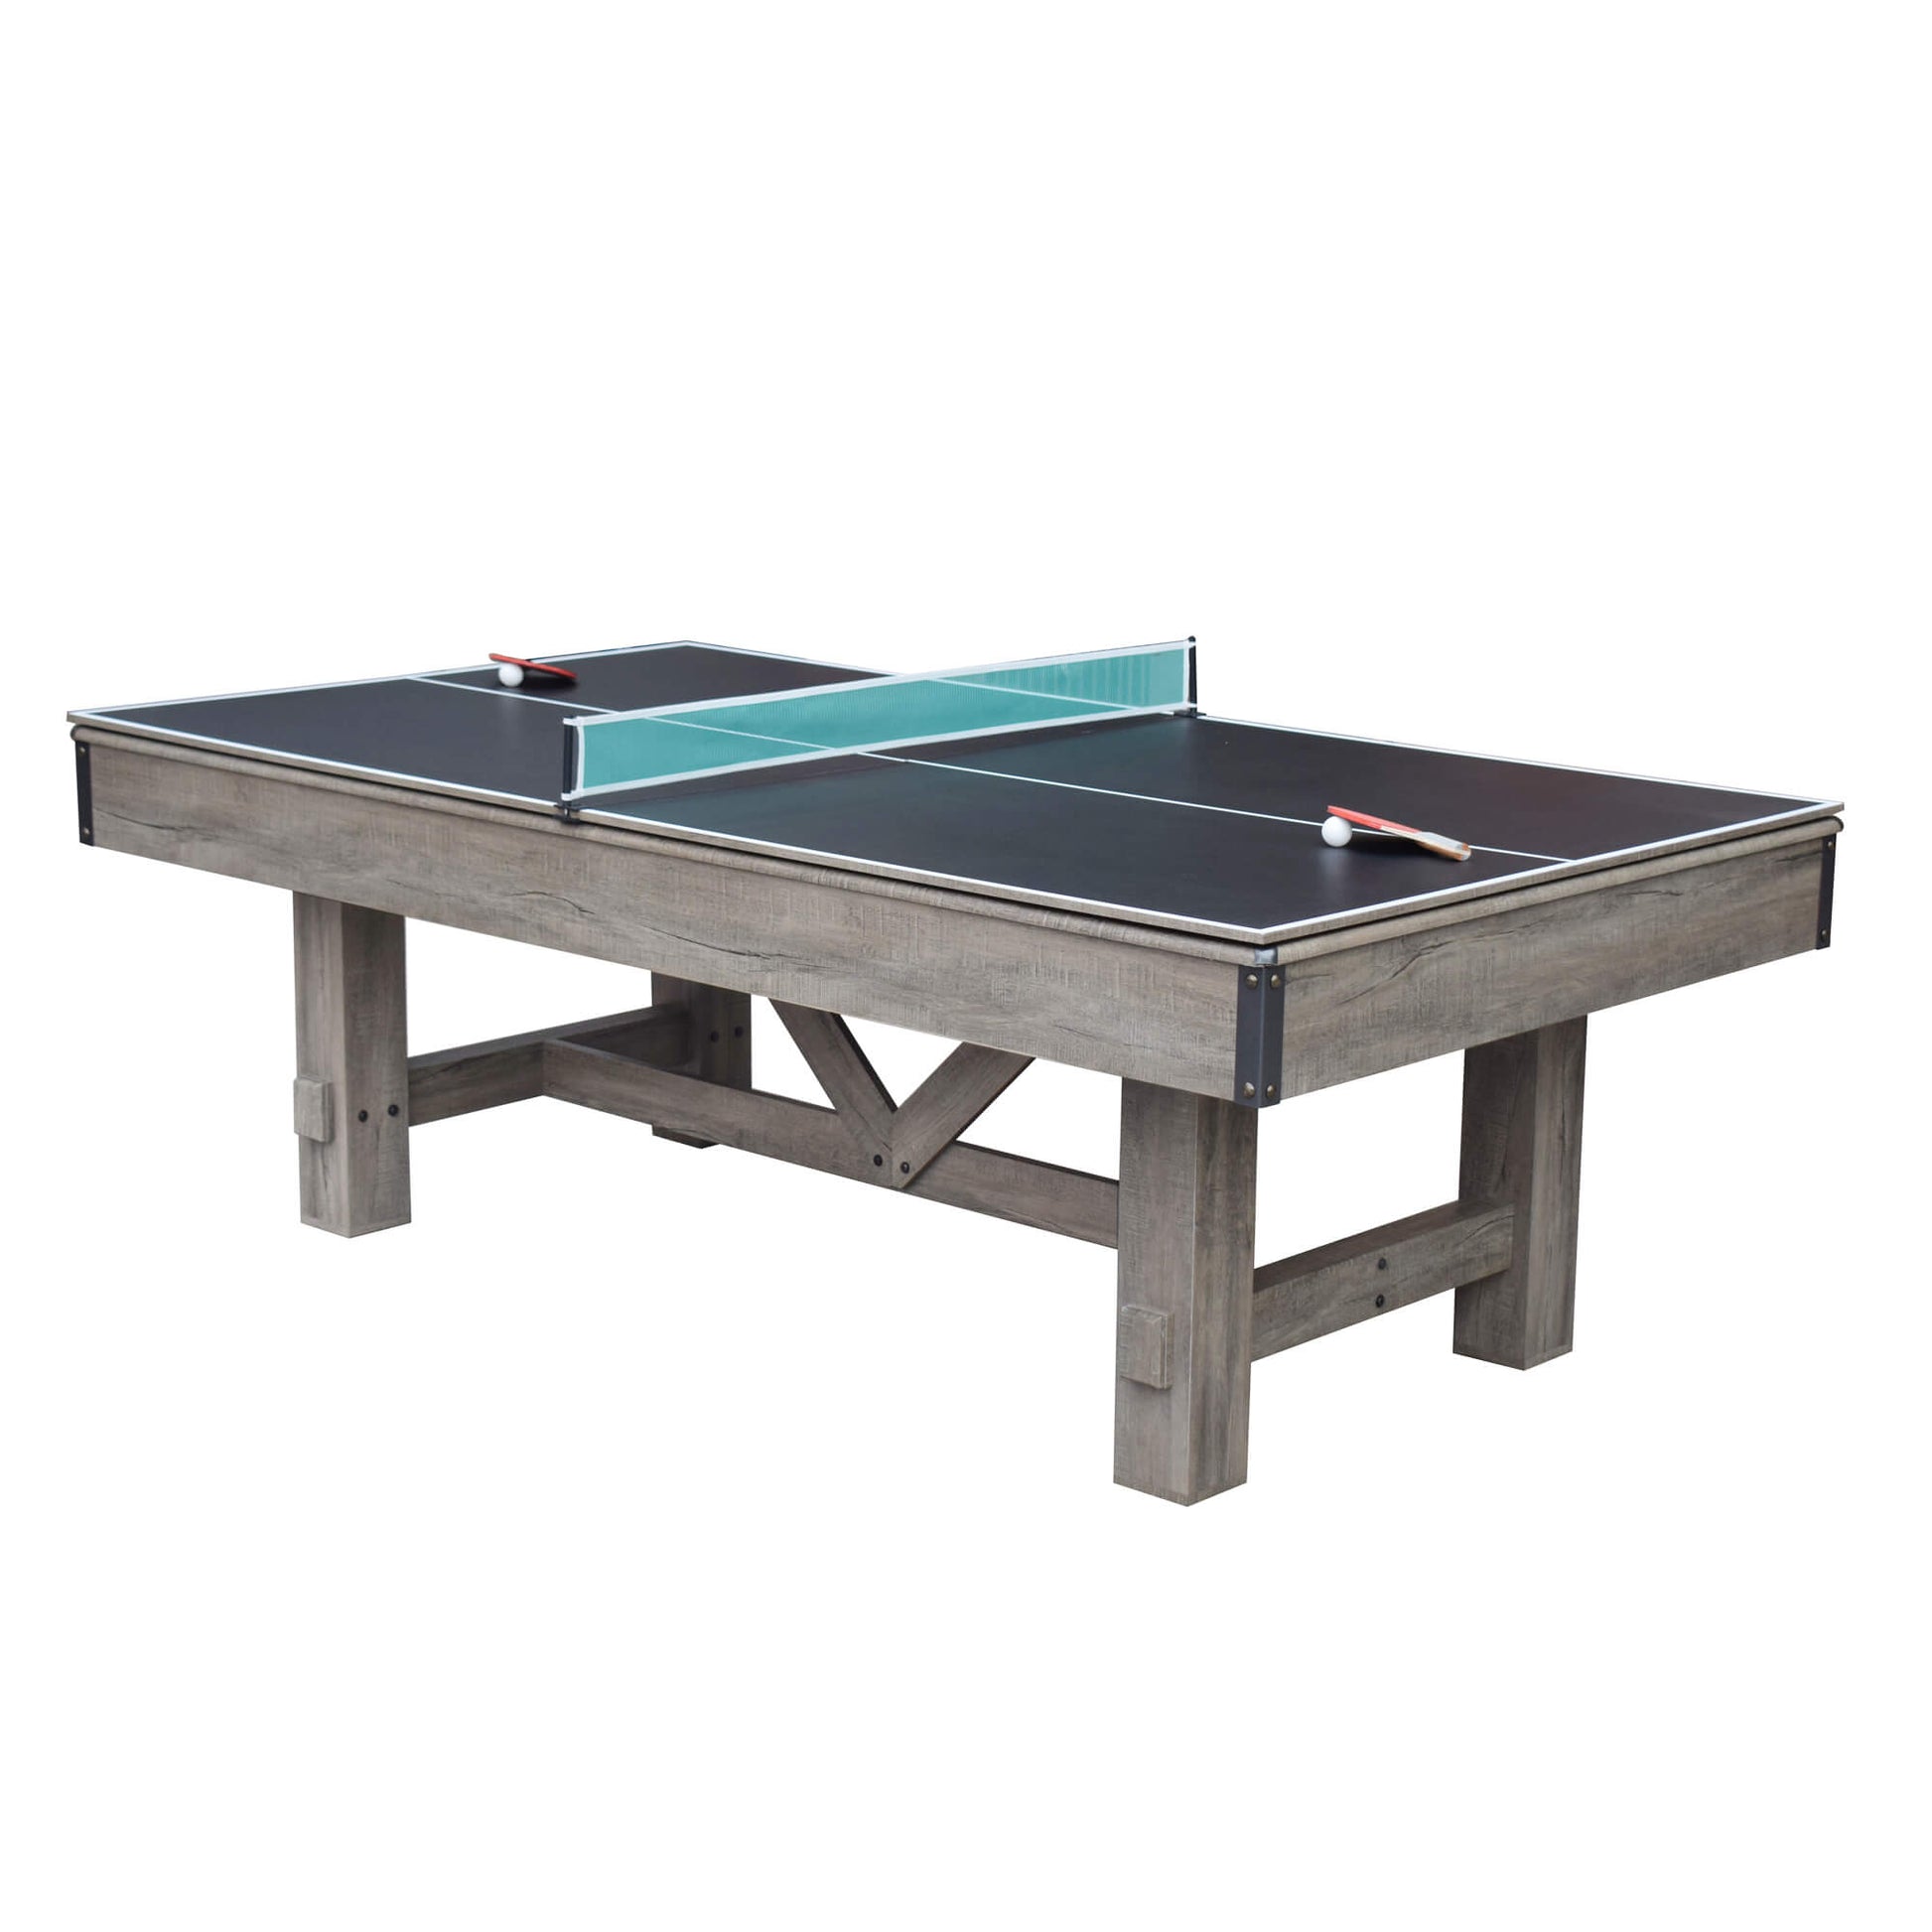 Hathaway Logan 7ft Multi Game Pool Dining Table with Benches - Gaming Blaze